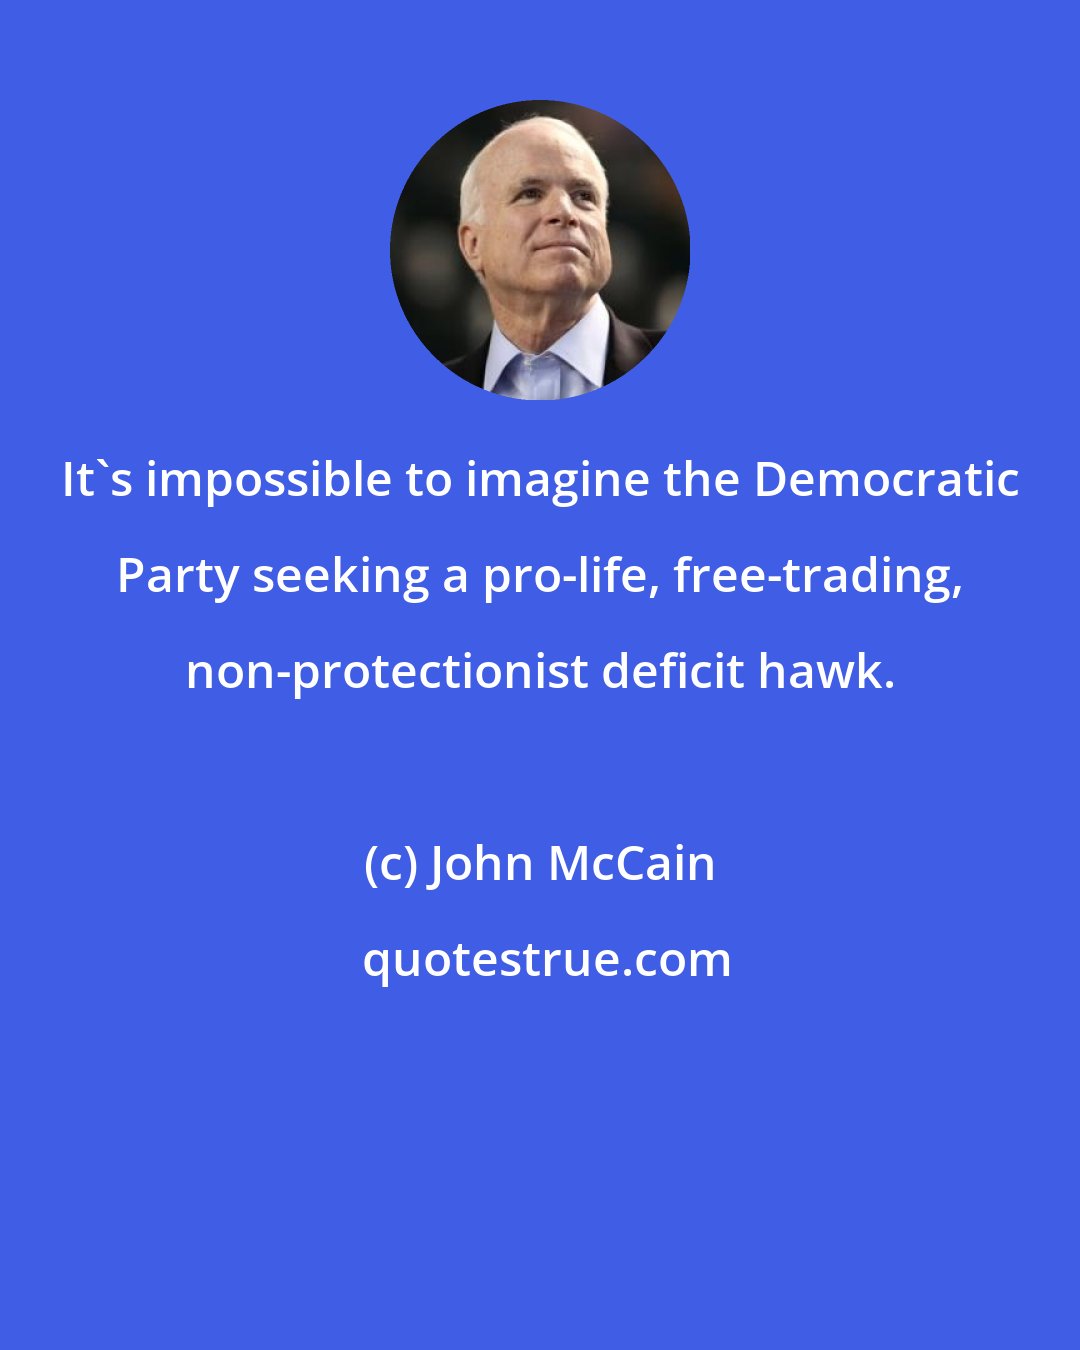 John McCain: It's impossible to imagine the Democratic Party seeking a pro-life, free-trading, non-protectionist deficit hawk.